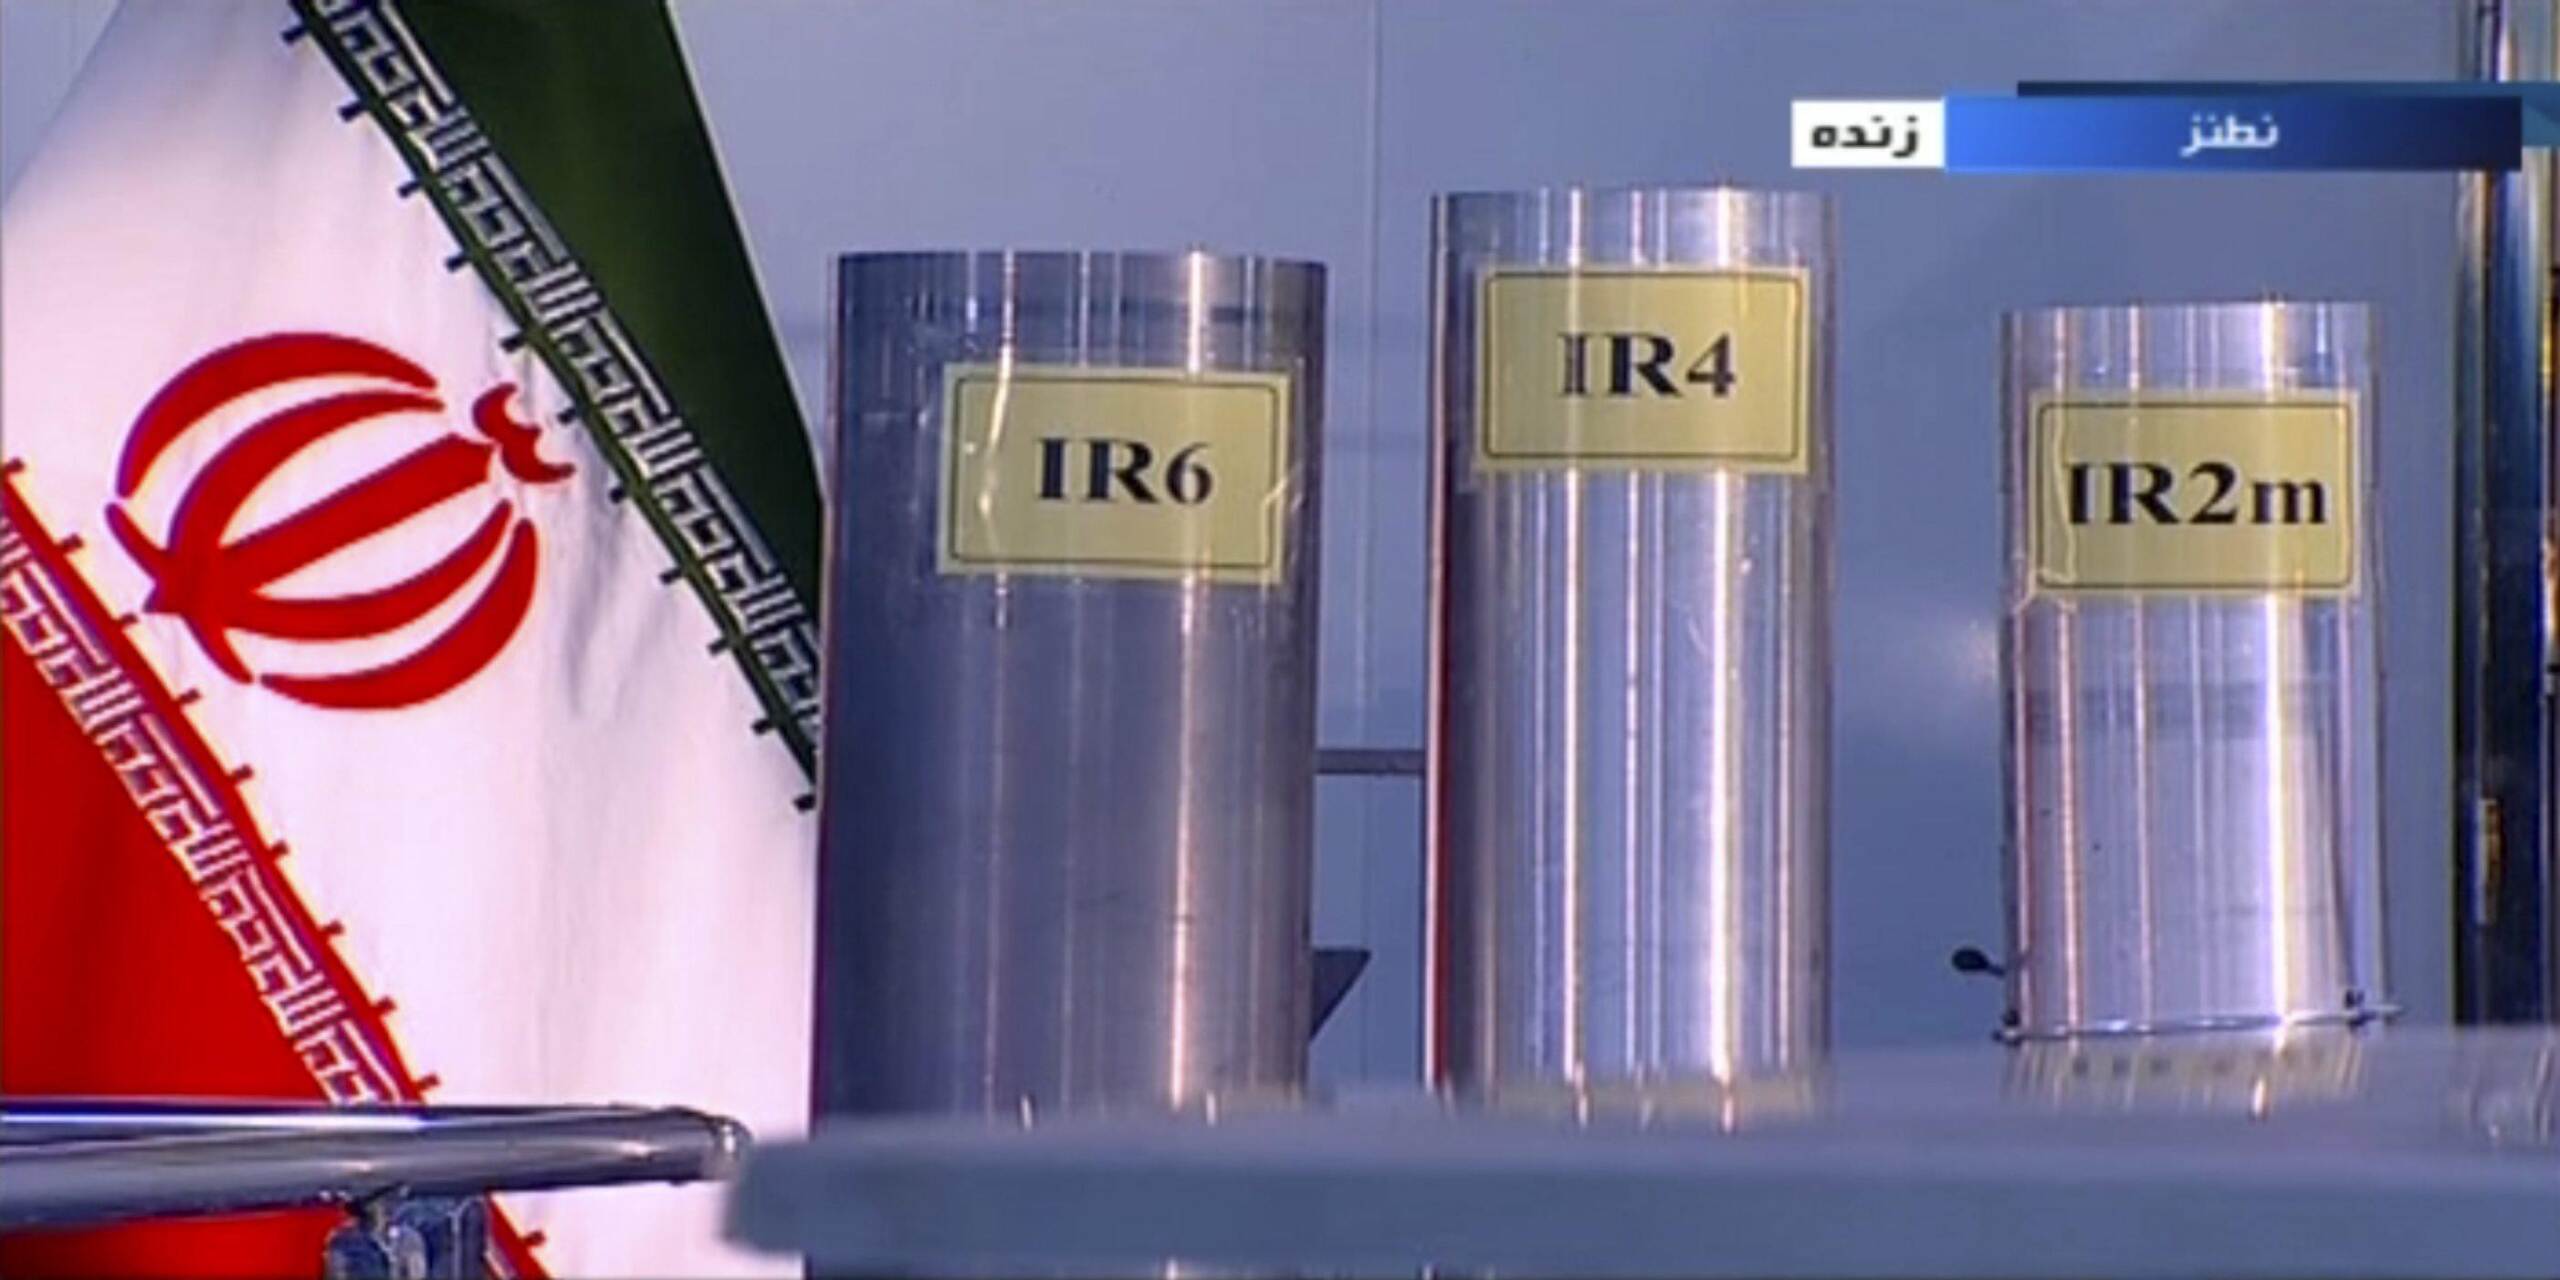 ifmat - Iran expands nuclear program with more IR-6 centrifuges